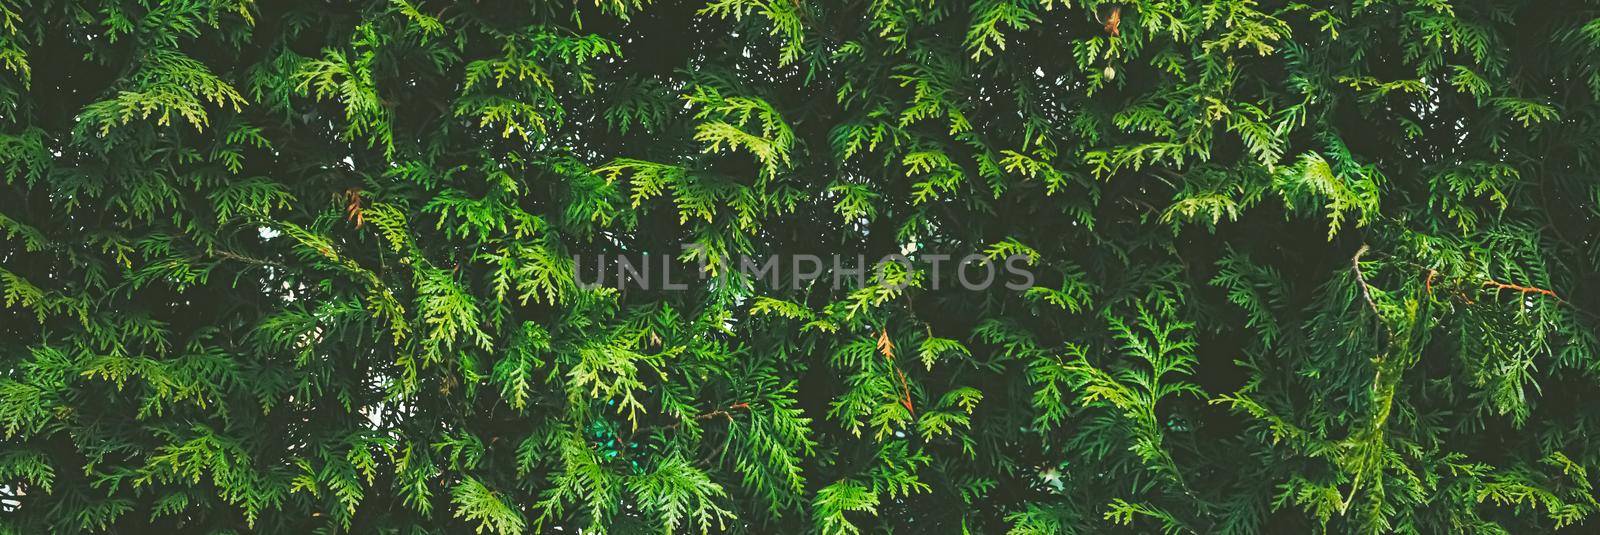 Thuja shrub wall as plant texture and nature background design